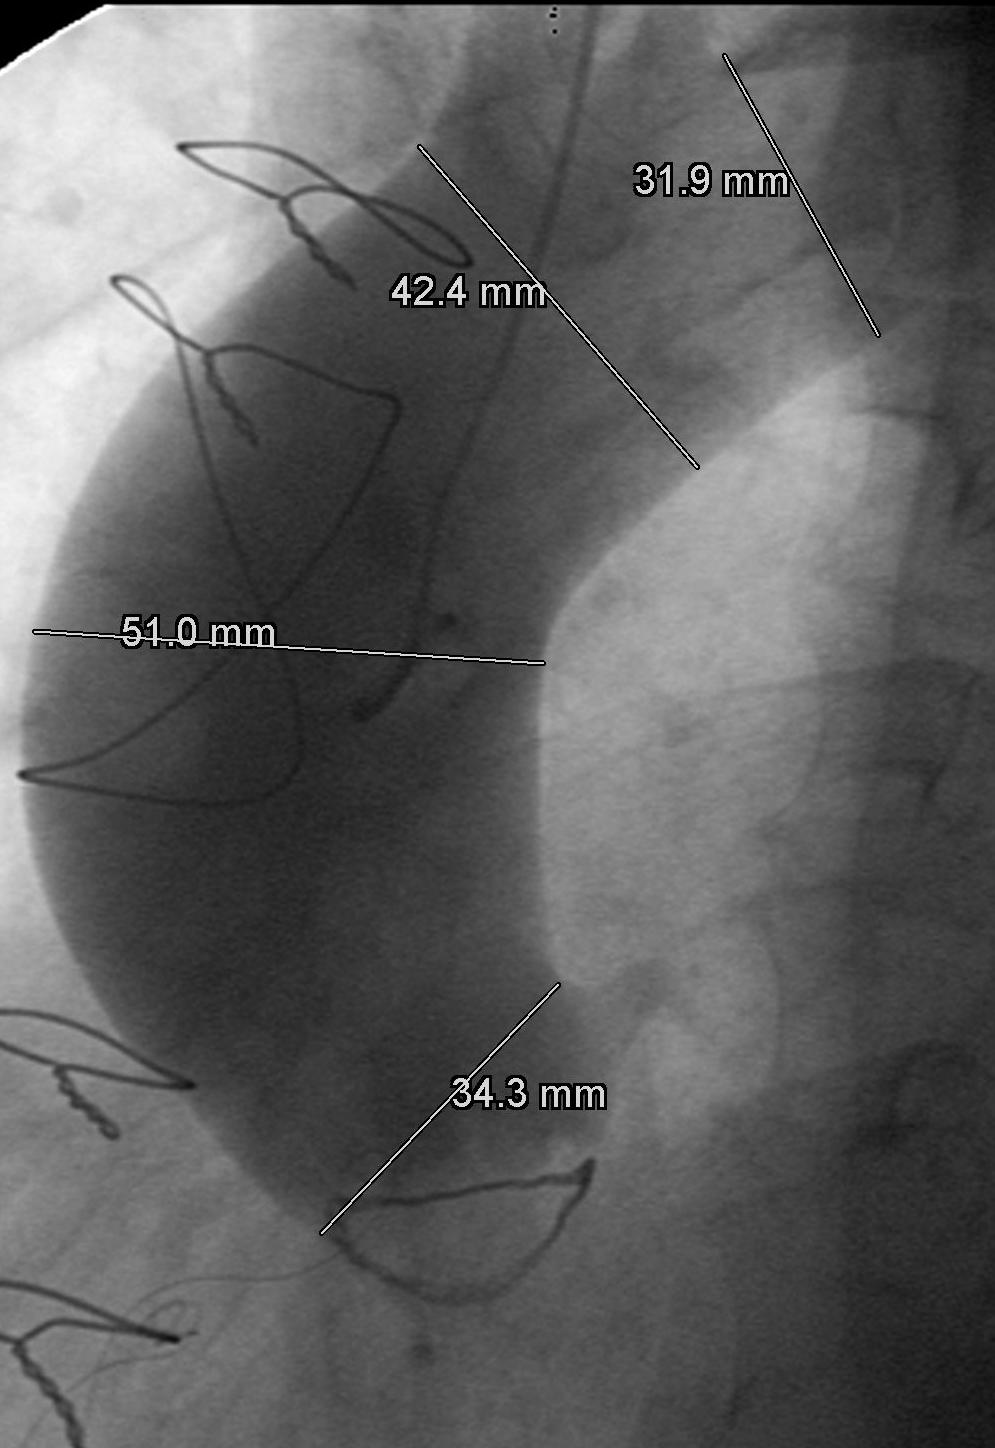 5 cm should be considered for concomitant repair of the aortic